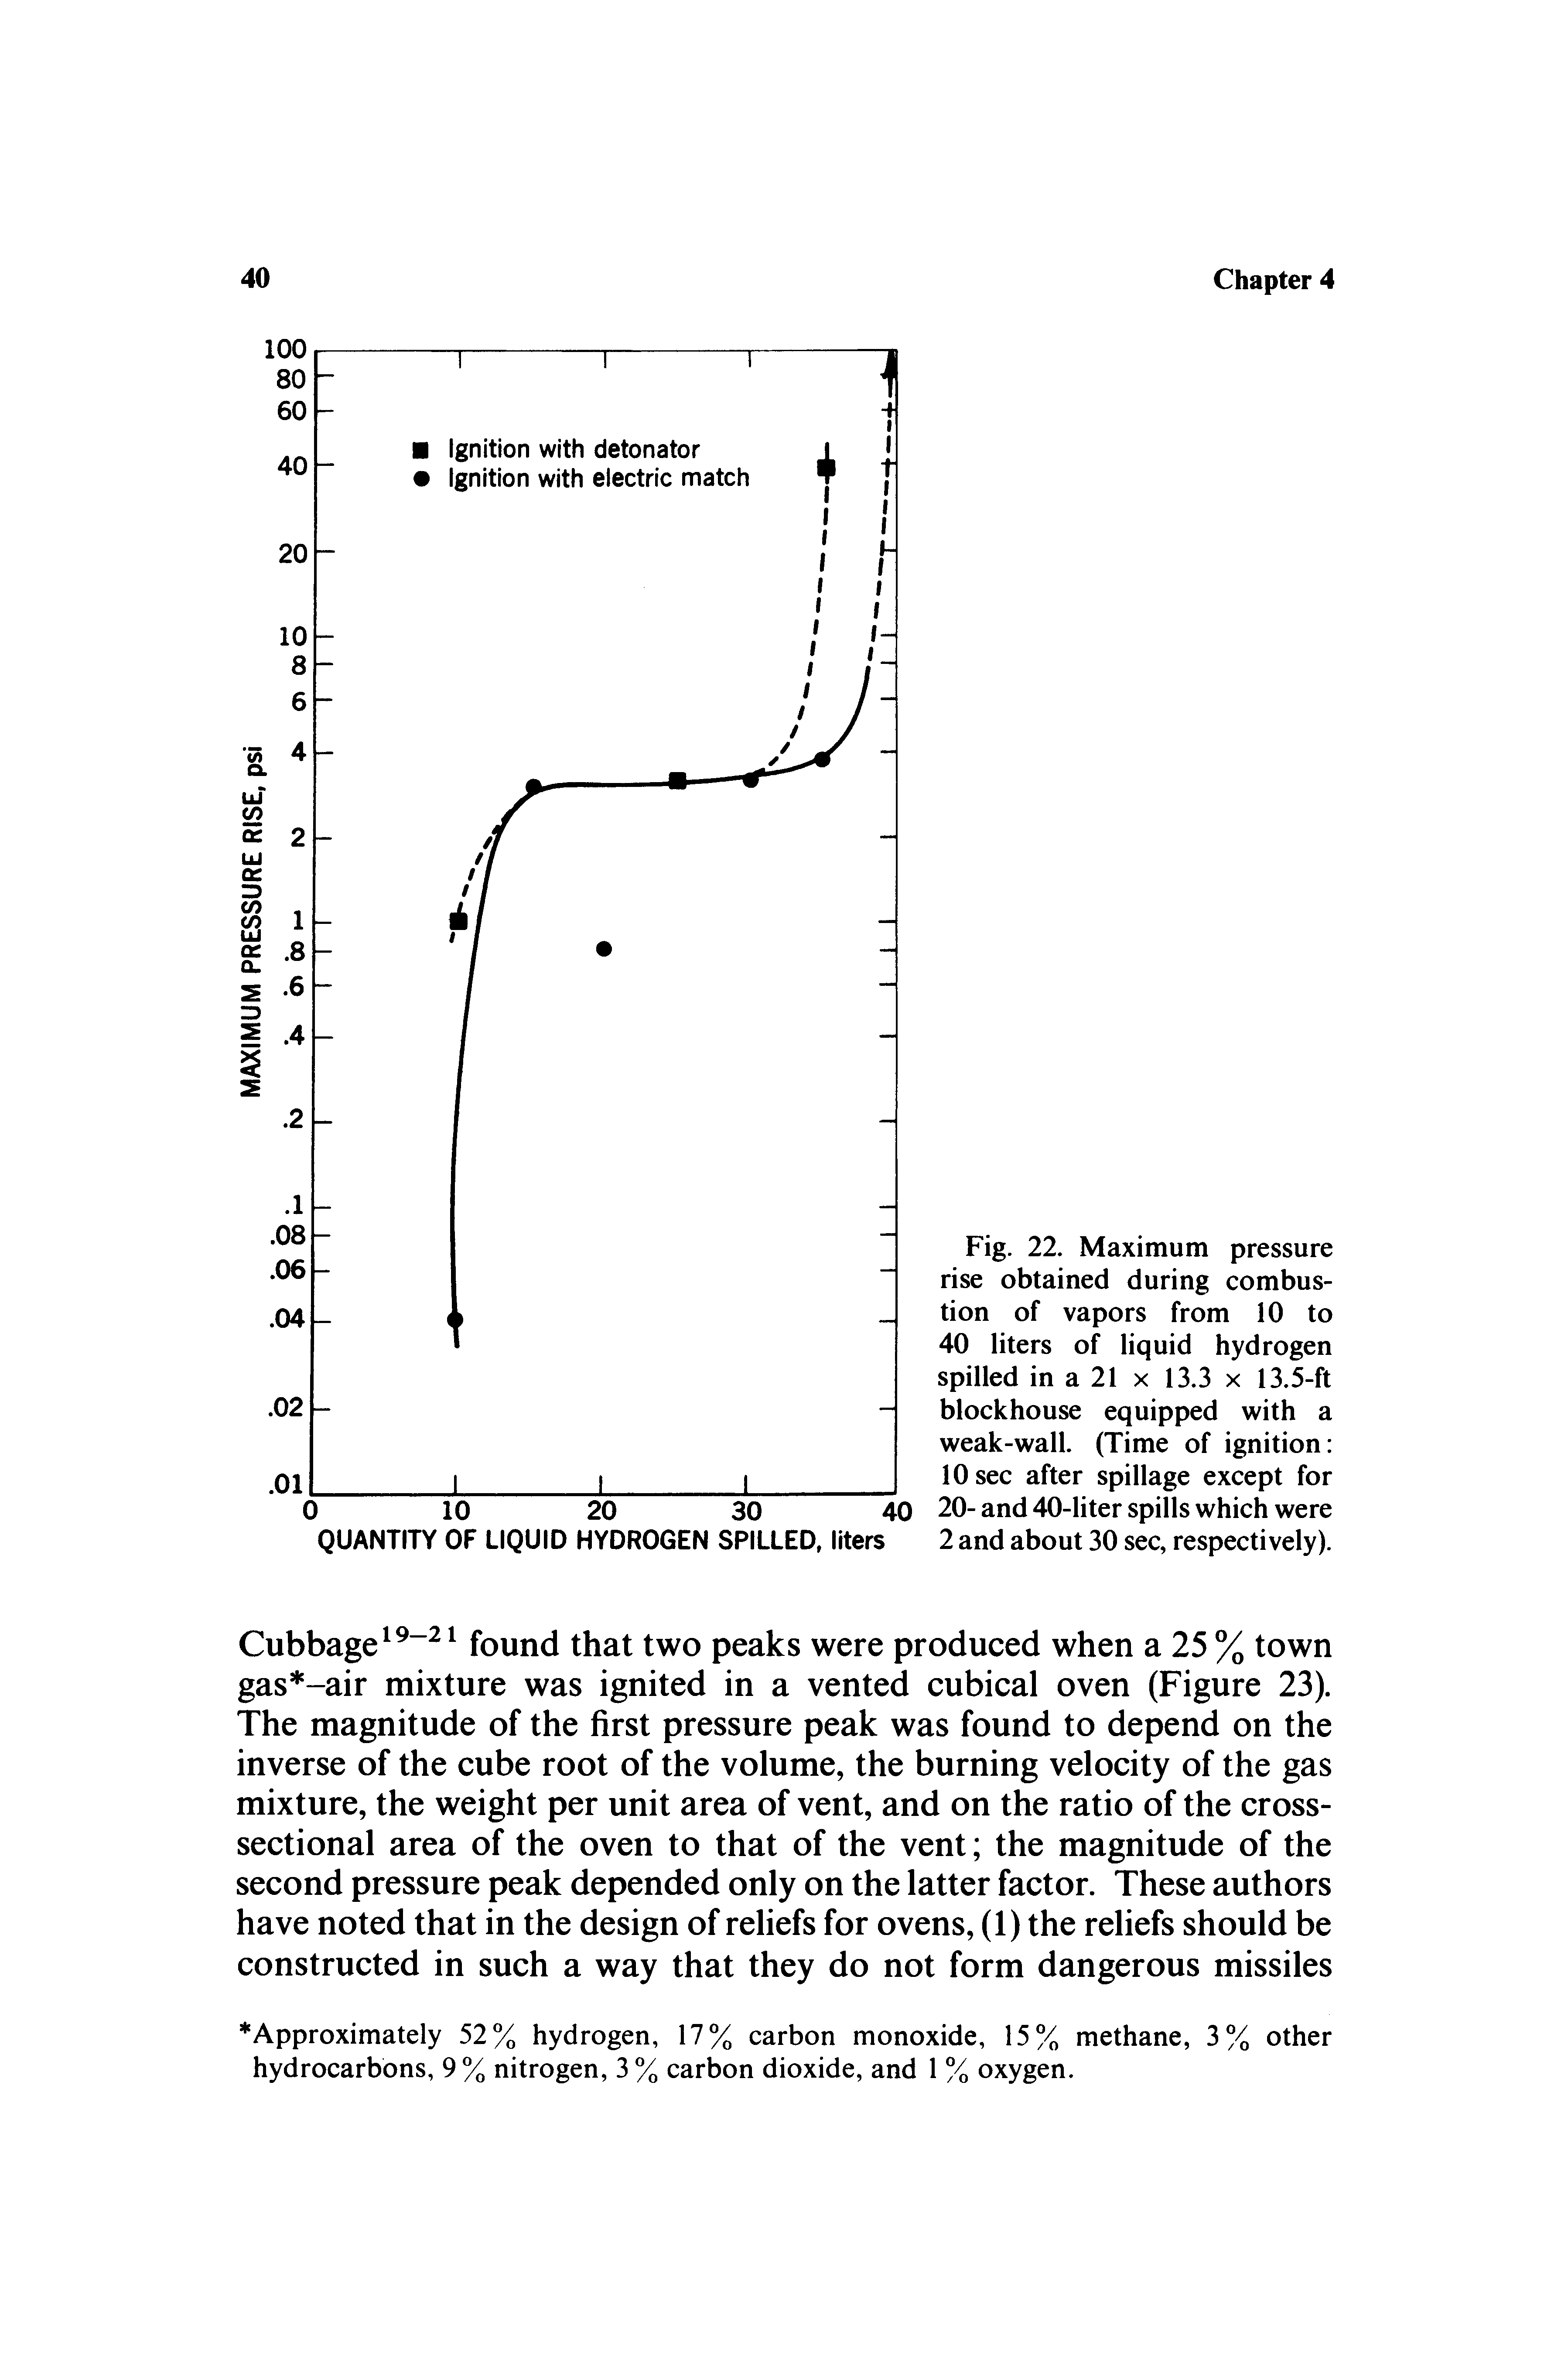 Fig. 22. Maximum pressure rise obtained during combustion of vapors from 10 to 40 liters of liquid hydrogen spilled in a 21 x 13.3 x 13.5-ft blockhouse equipped with a weak-wall. (Time of ignition 10 sec after spillage except for 20- and 40-liter spills which were 2 and about 30 sec, respectively).